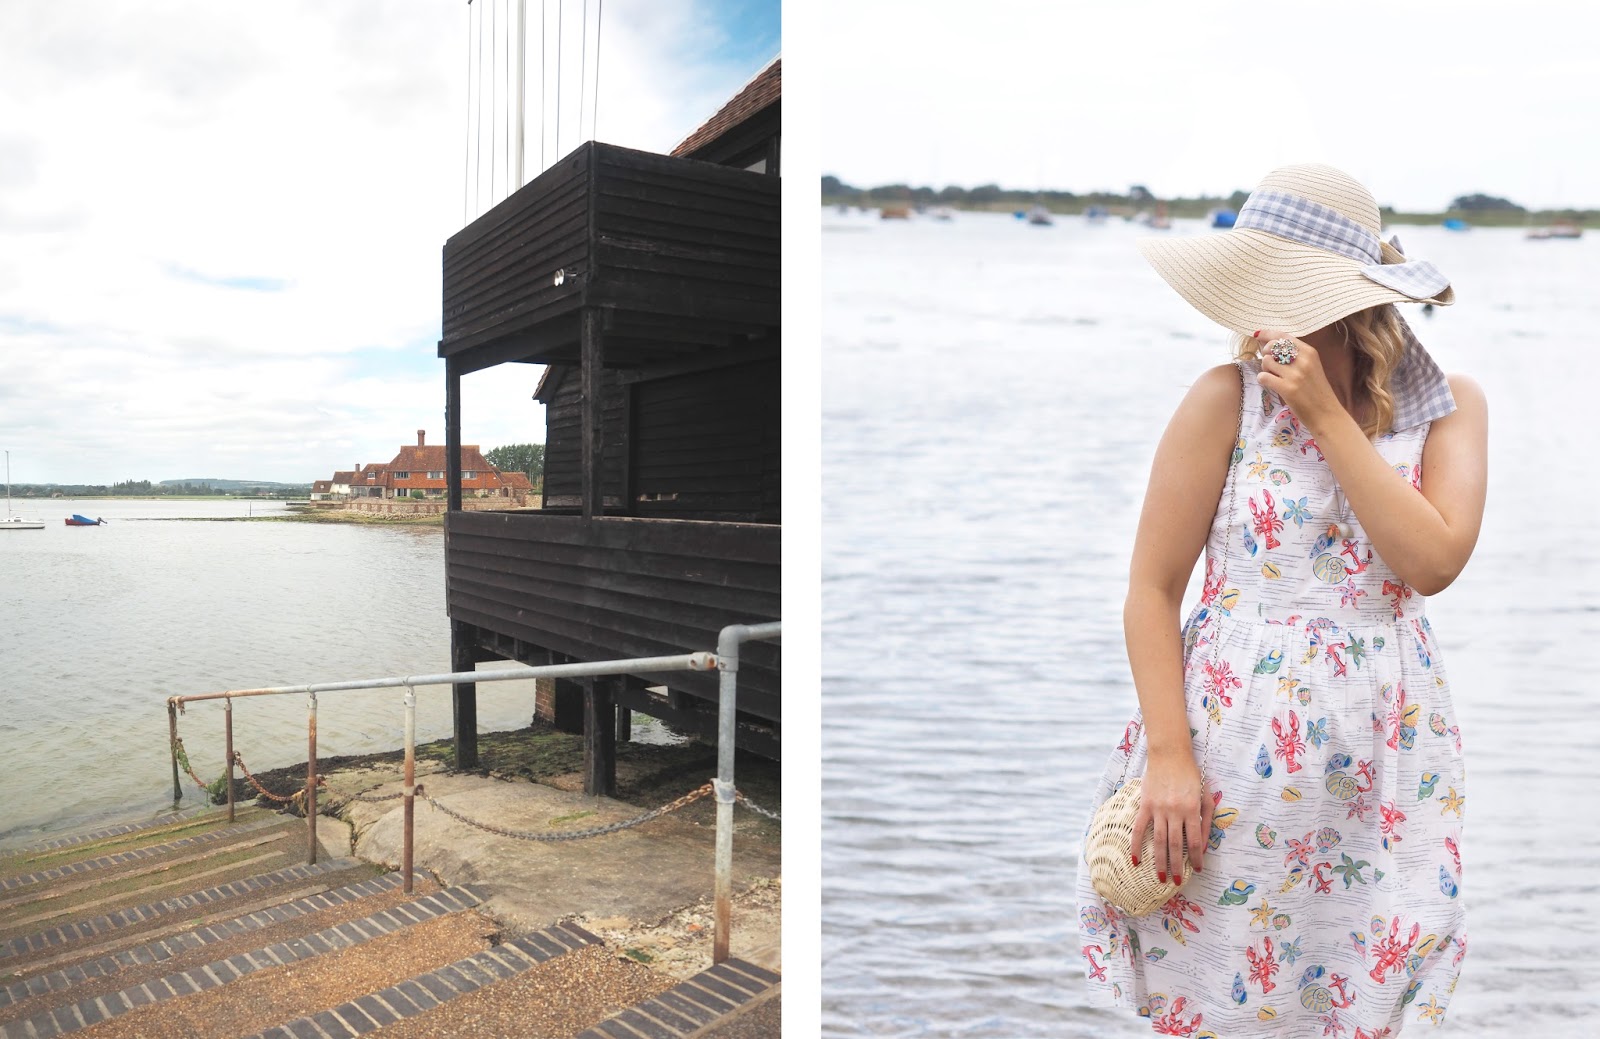 Seaside Prints Outfit, Summer Lookbook, Katie Kirk Loves, UK Blogger, Fashion Blogger, Style Blogger, Outfit of the Day, Aspire Style, Cath Kidston, Lobster & Shells, Cath Kidston Lobster & Shell Print Dress, Moshulu Shoes, Summer Style, Bosham Harbour, West Sussex